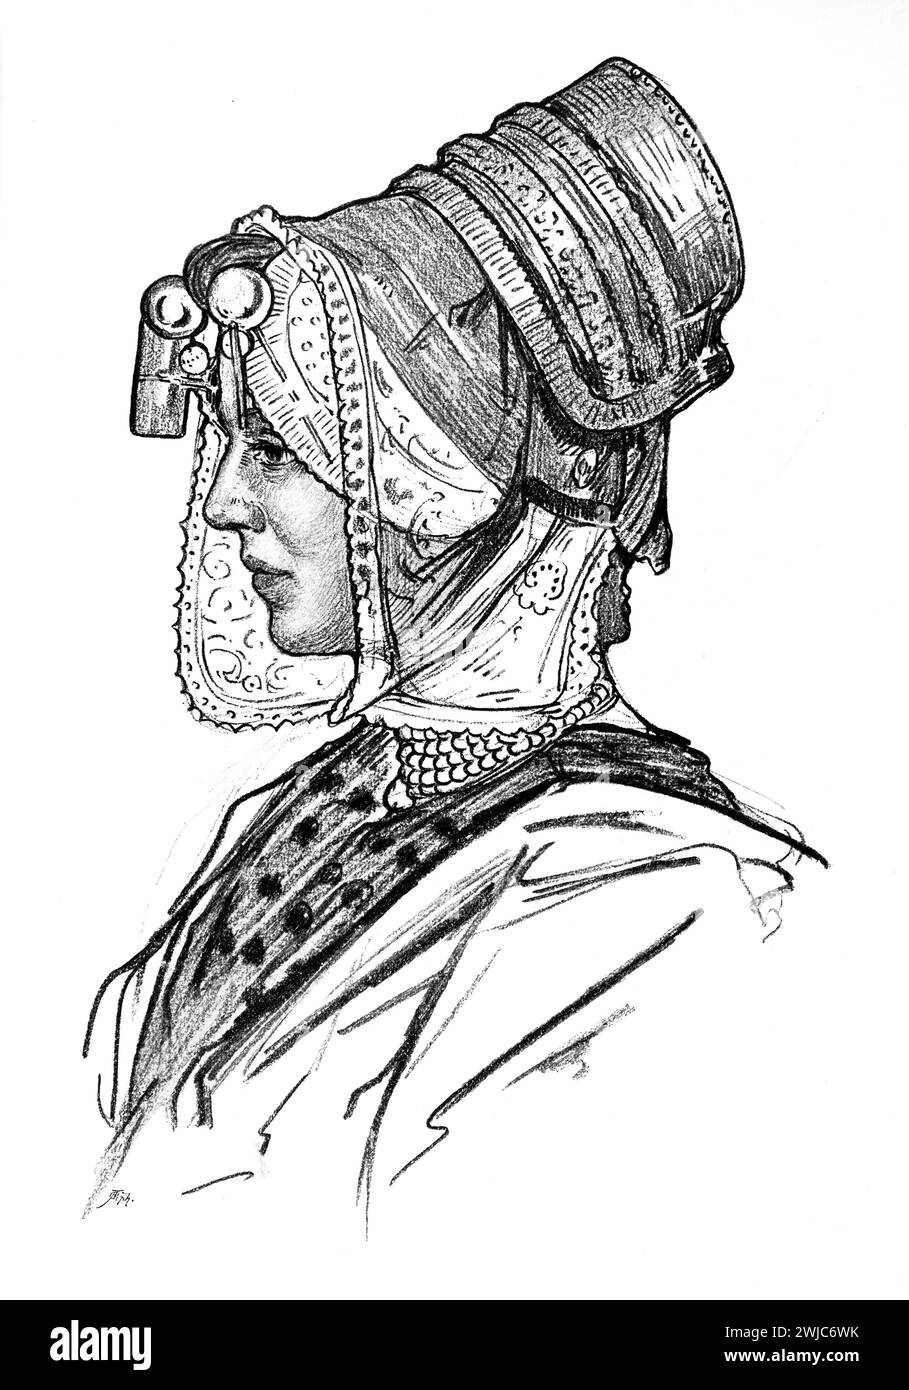 1901 Pencil illustration of Dutch woman from Zeeland in traditional wedding costume by Anglo-Dutch artist Nico Jungmann Stock Photo